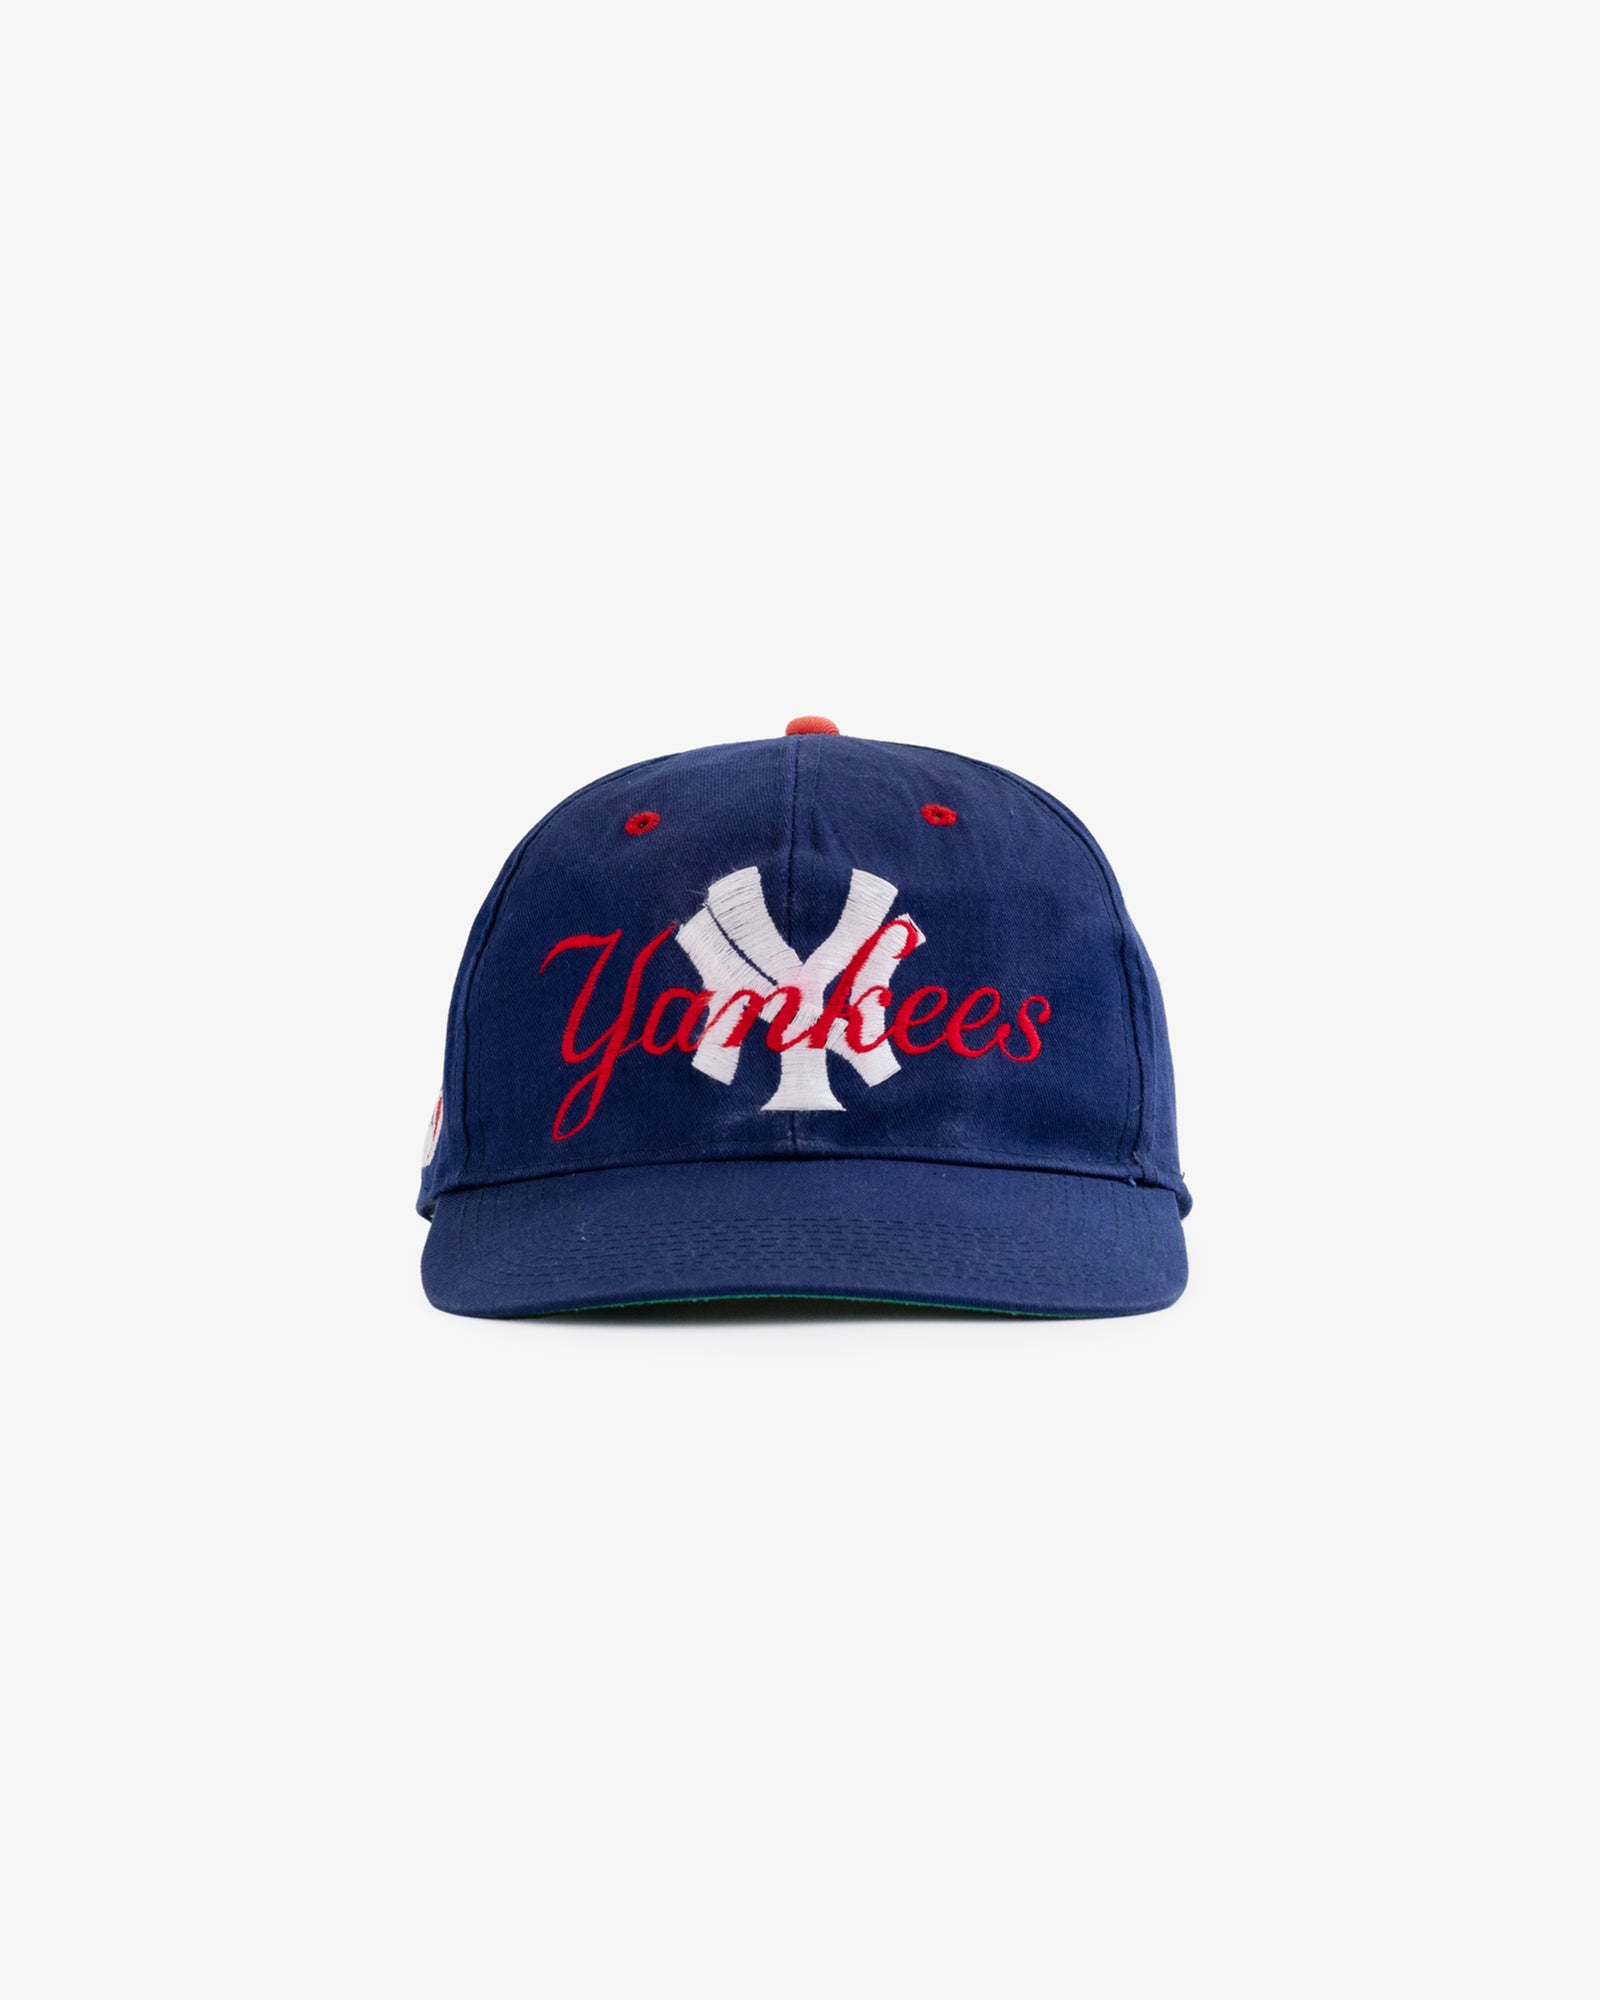 Vintage New York Yankees Spell Out Snapback